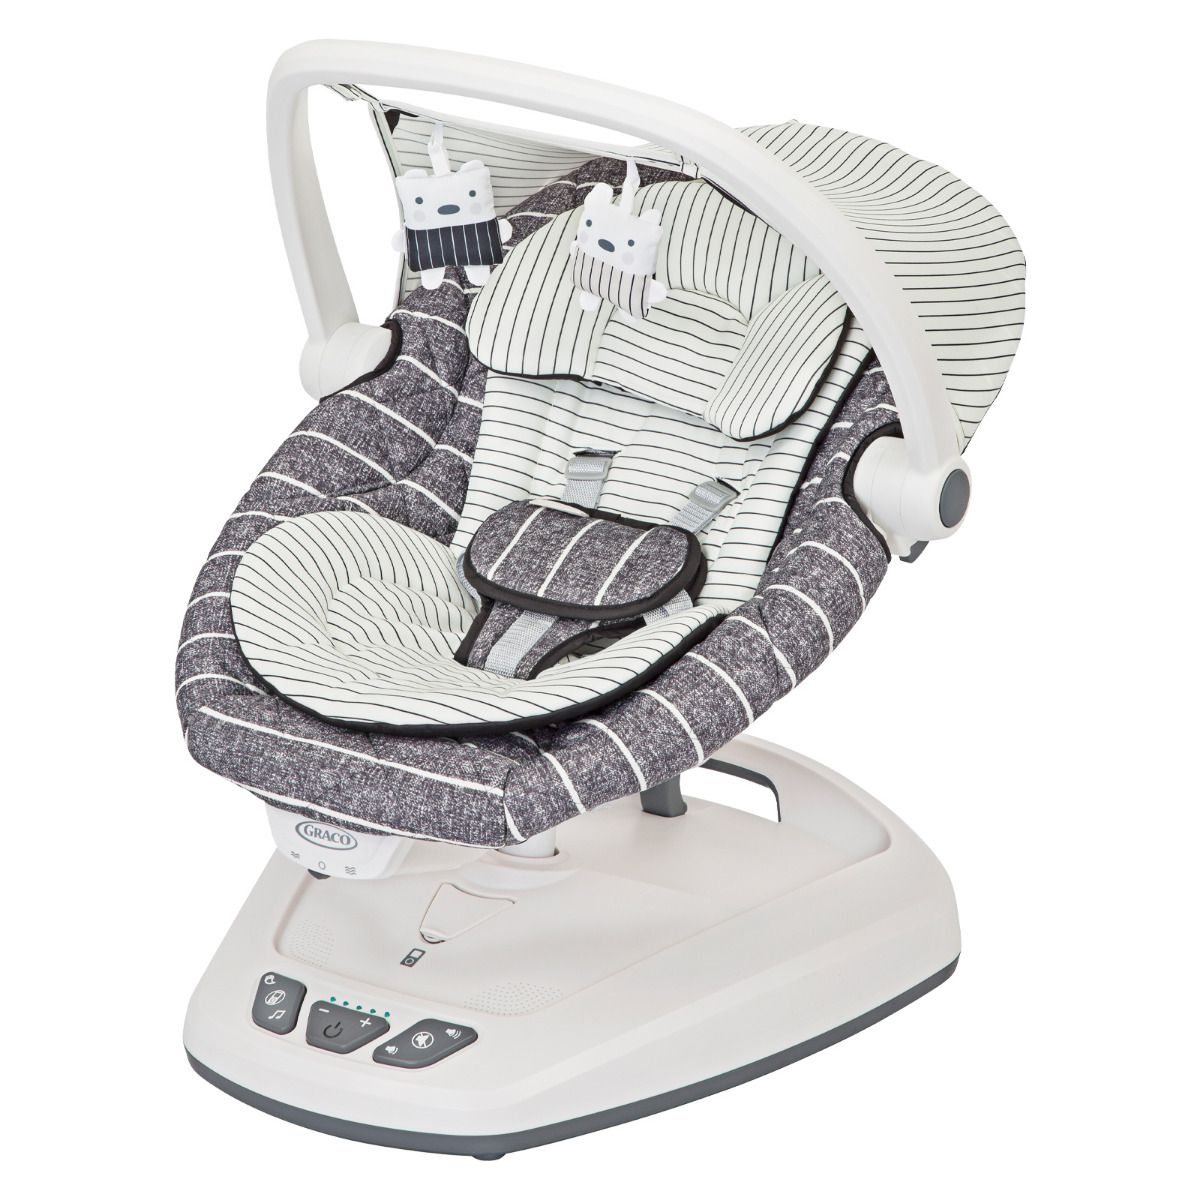 Graco Move with me Canopy Babyschaukel